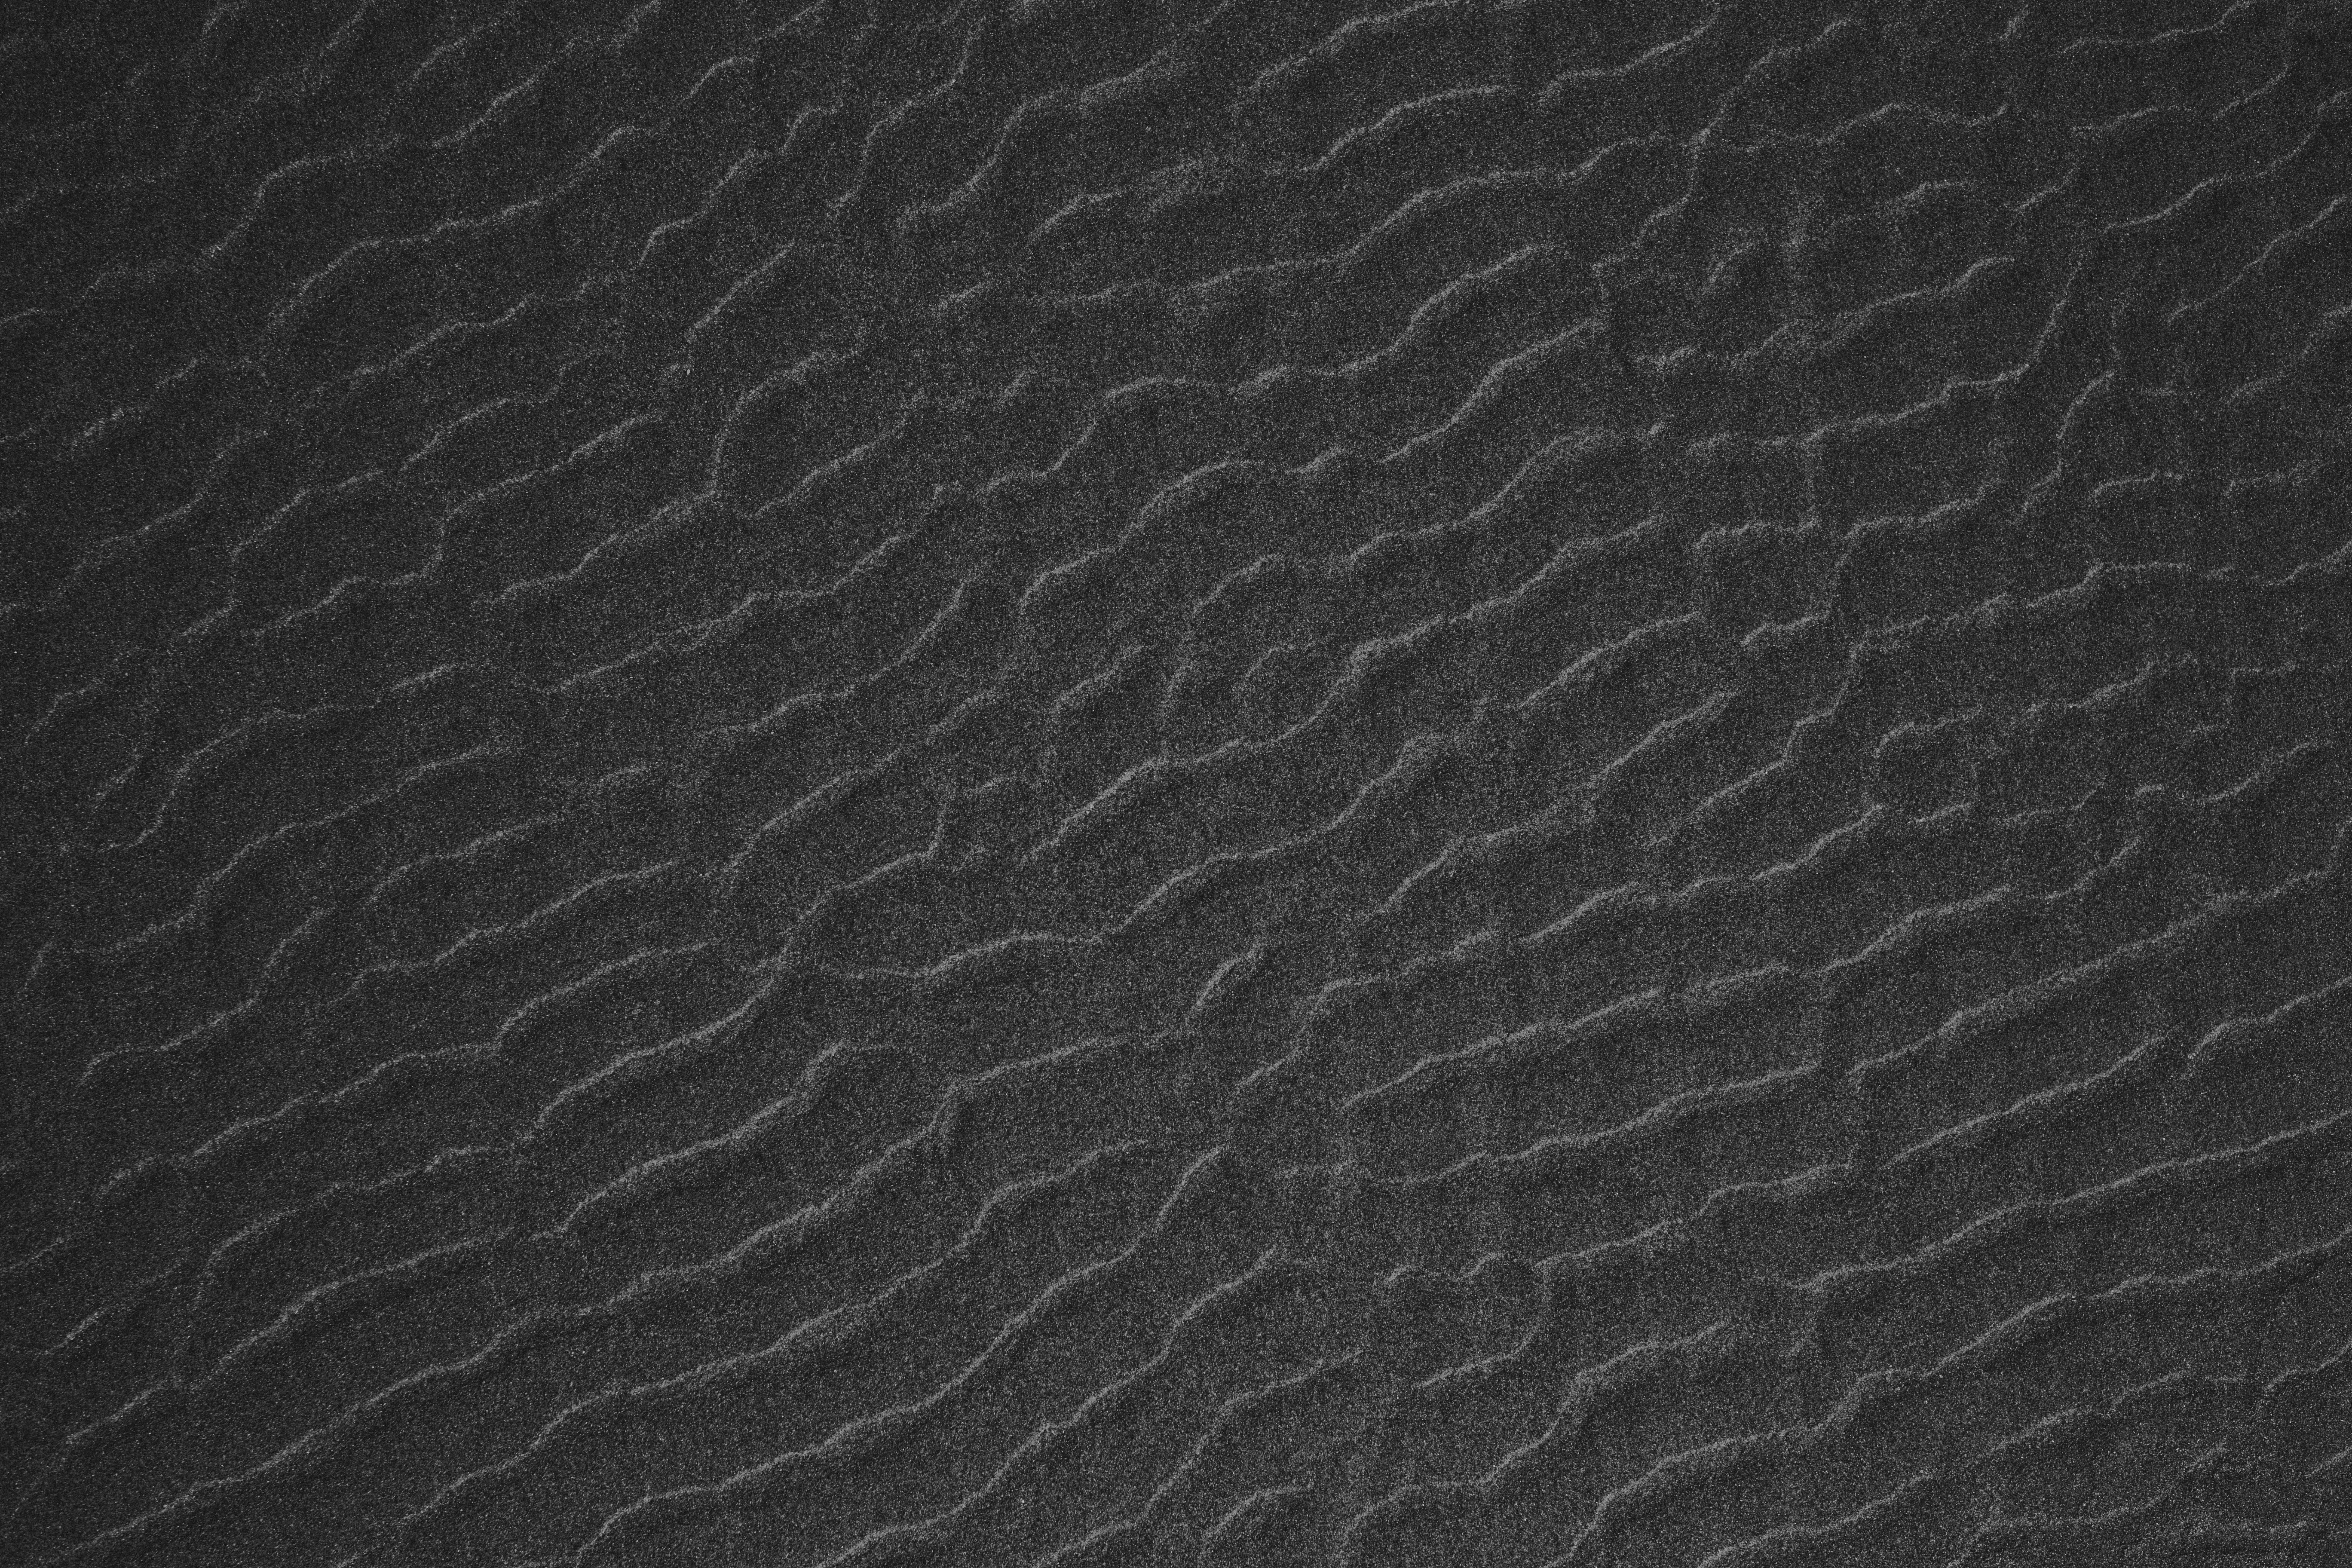 5472x3648 ripple, abstract, charcoa, black and white, black, pattern, faro district, background, grey, wrinkle, sand, wave, dune, gray, beach, portugal, texture, Free Gallery HD Wallpaper